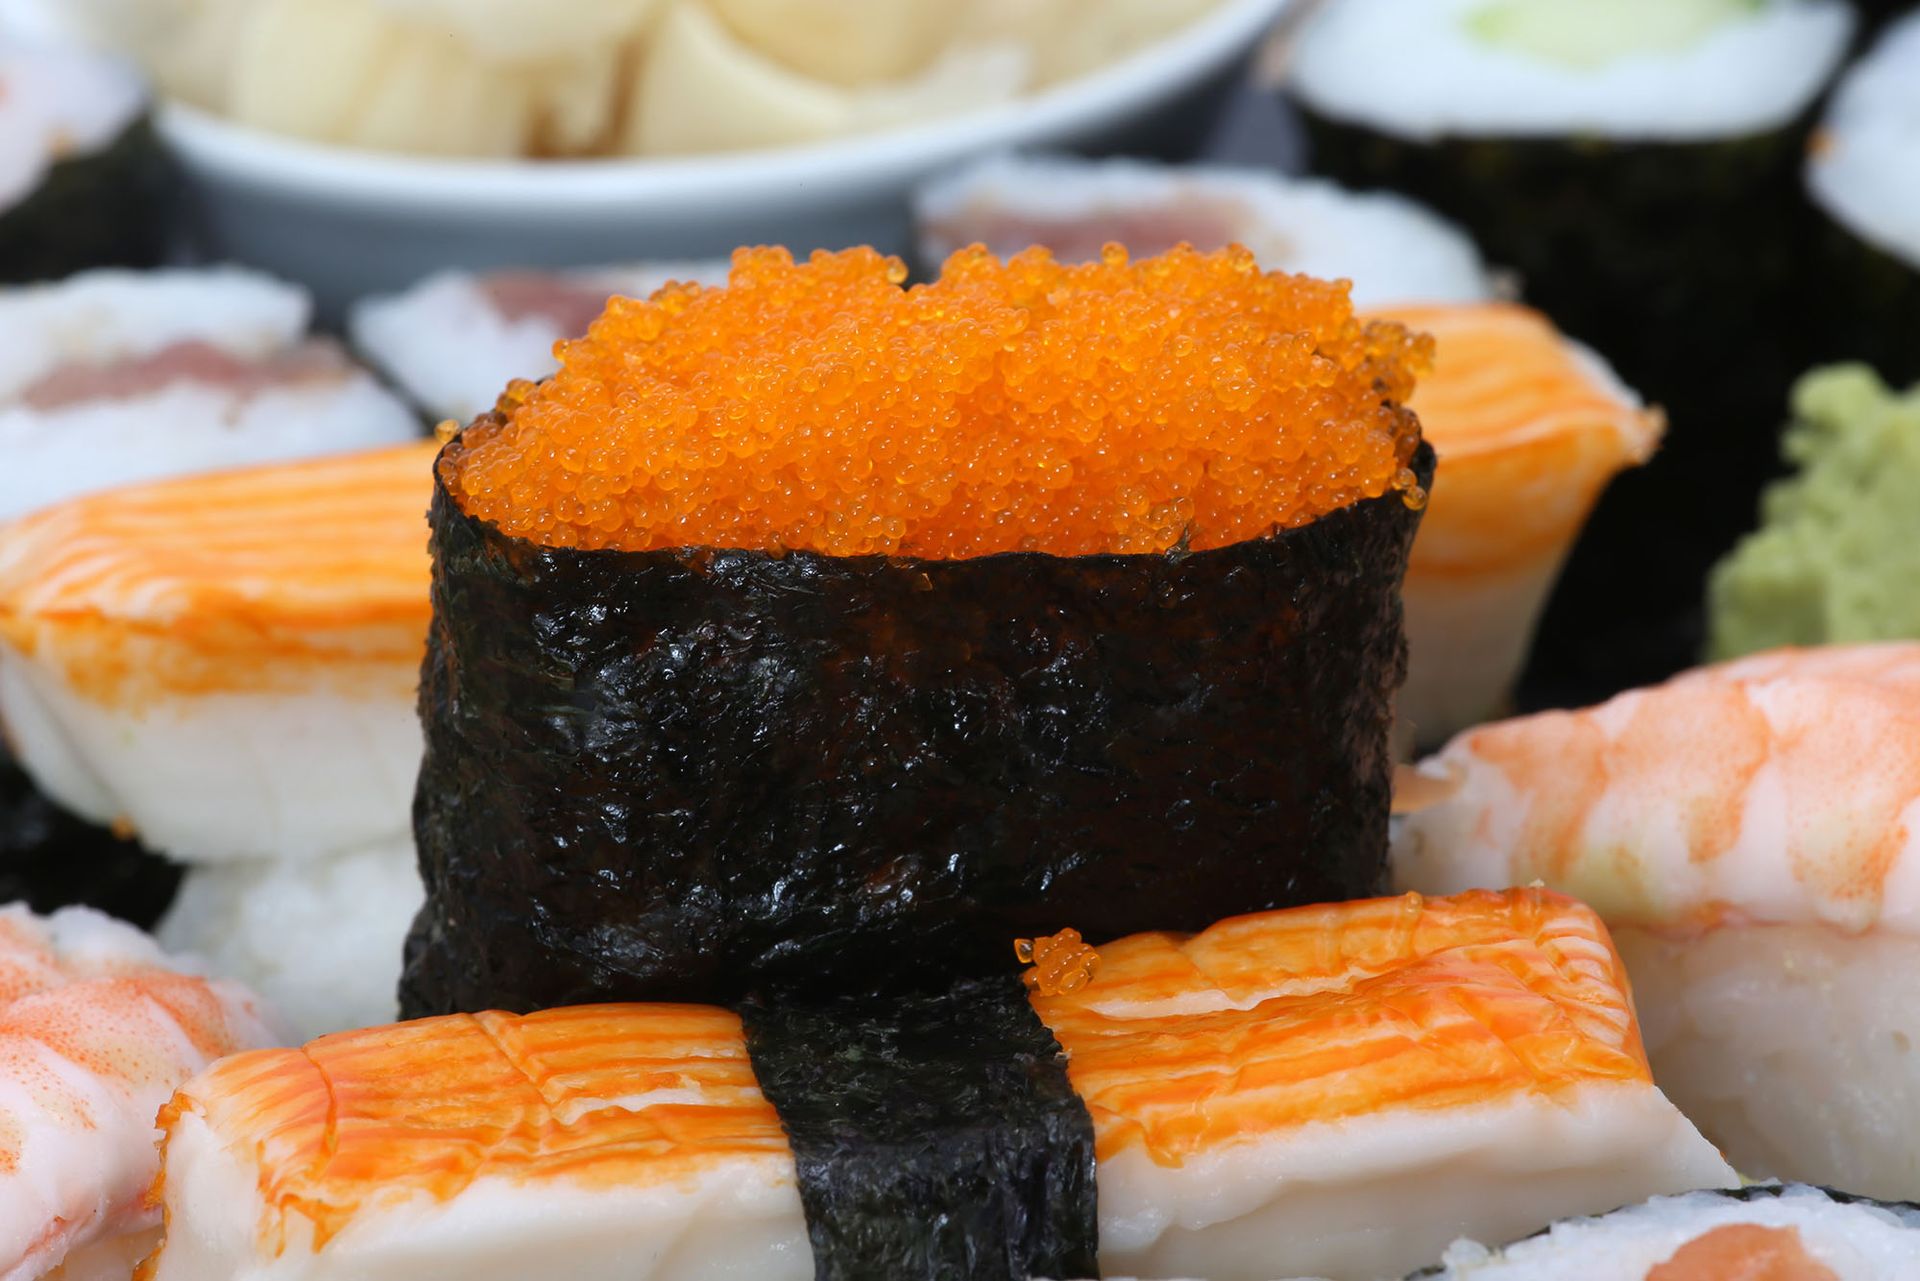 Sushi with caviar Photo by Tim Reckmann, via Flickr